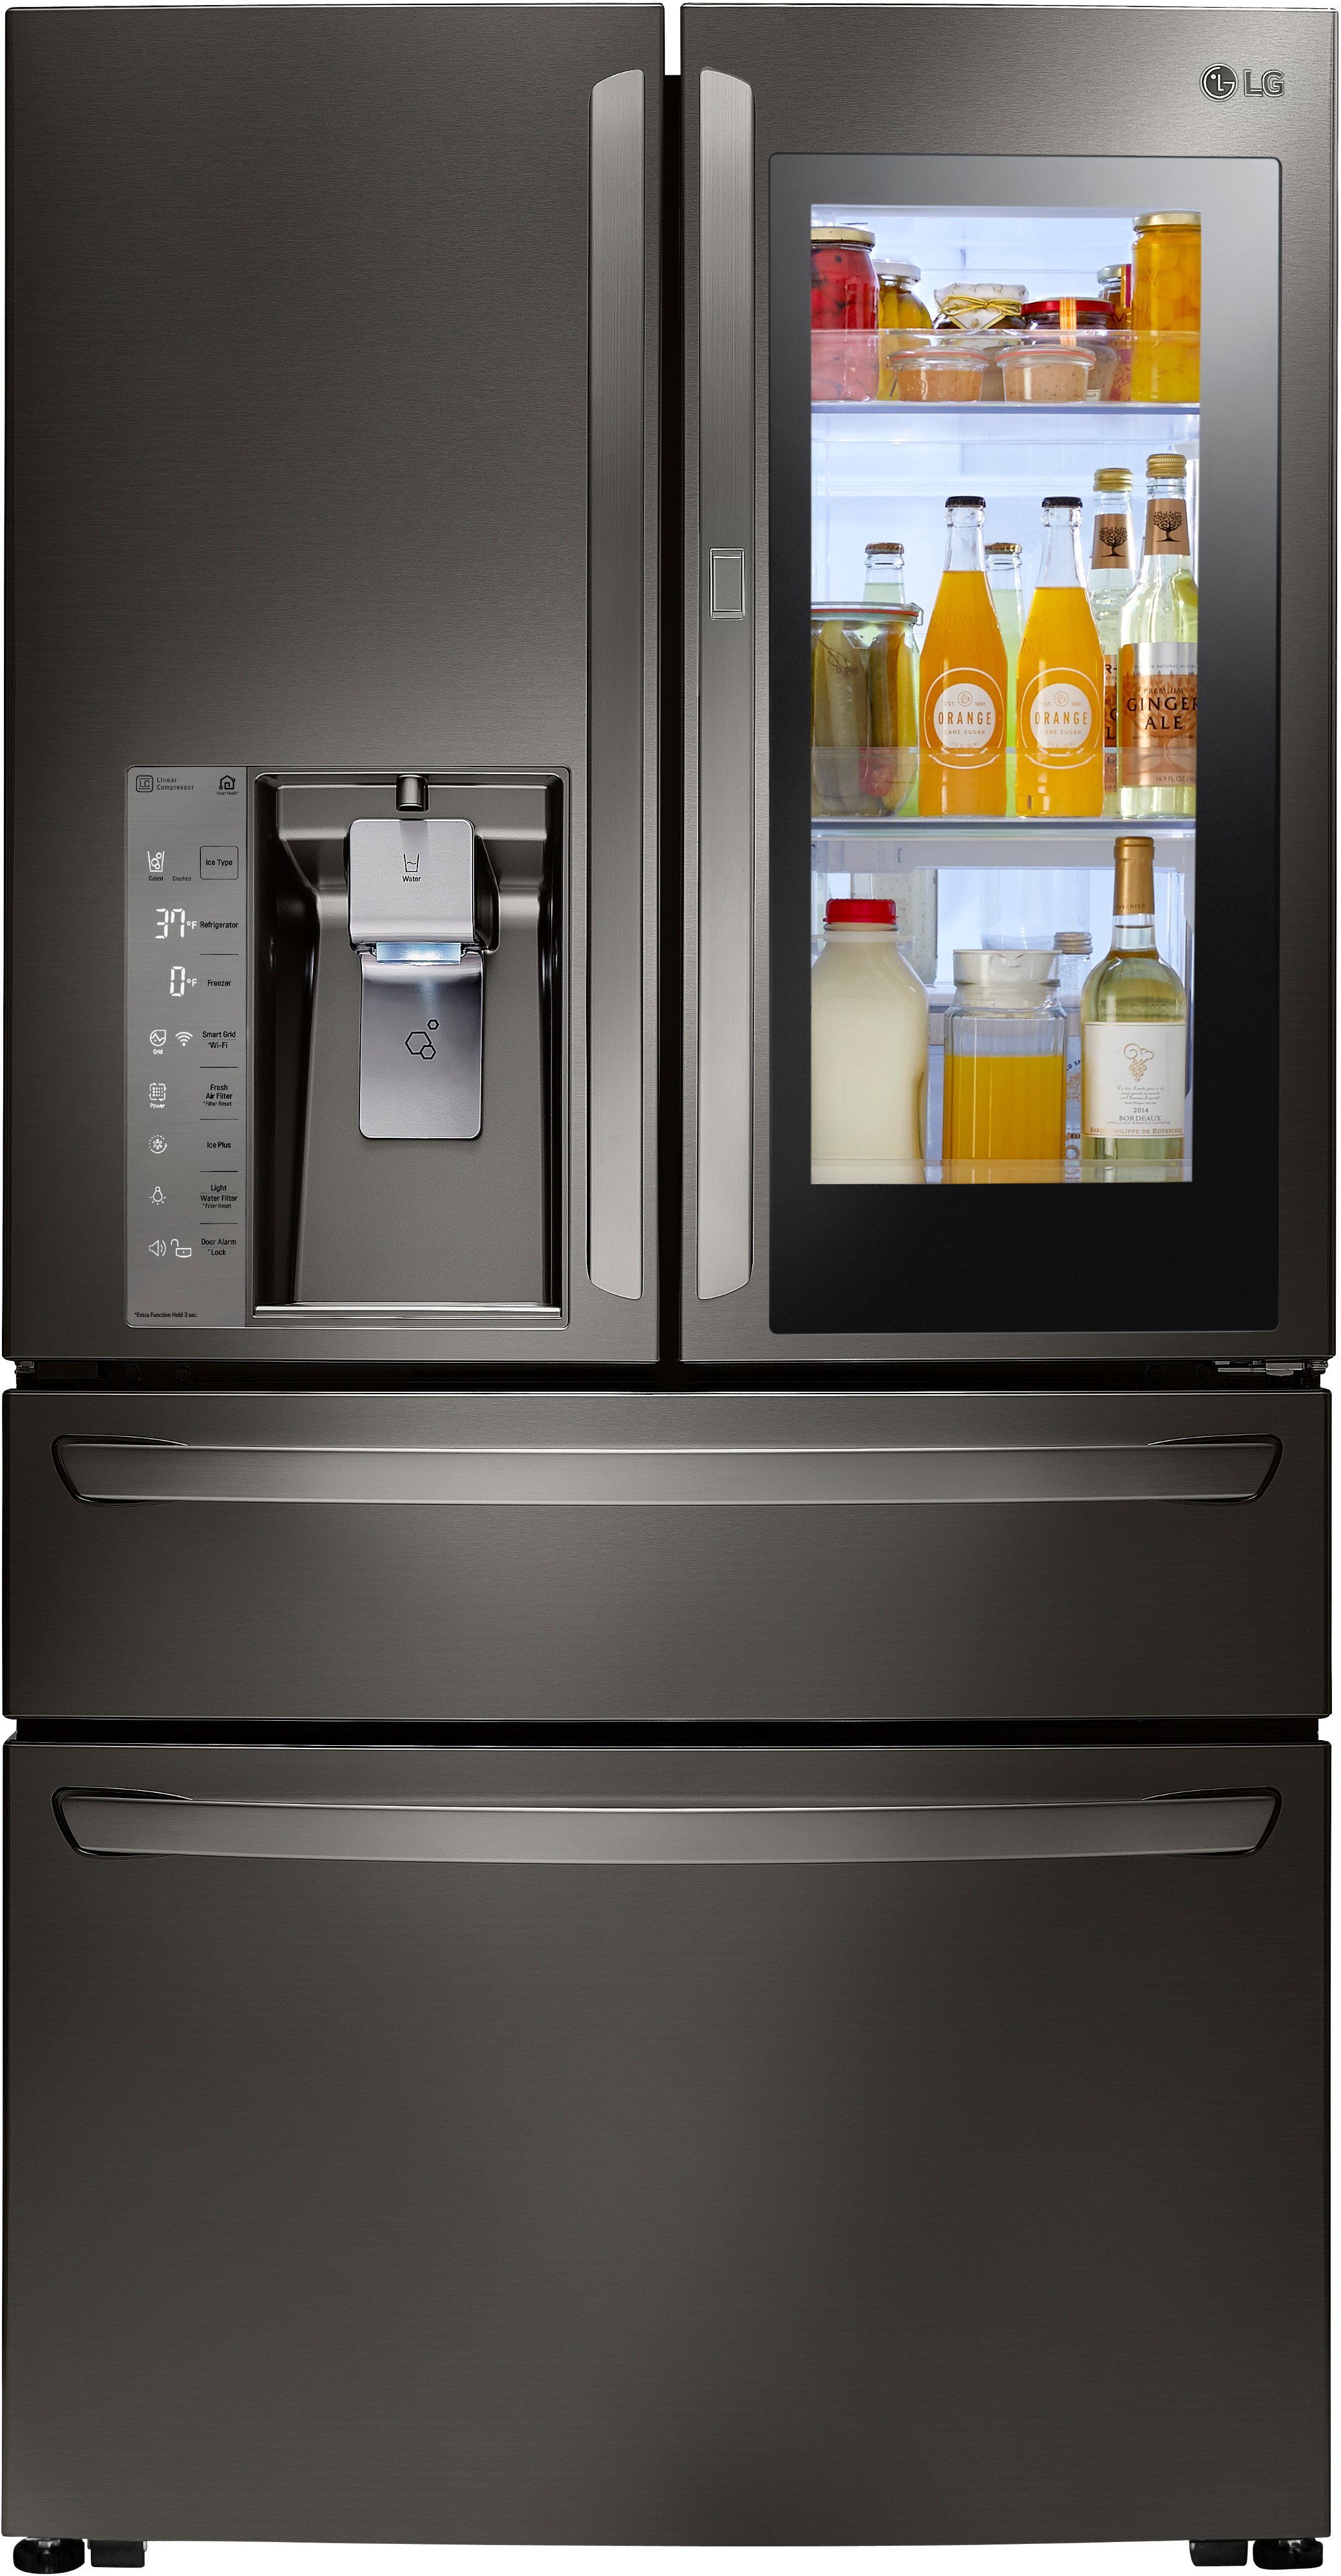 LG Black Stainless Steel 4 Piece Kitchen Appliance Package with Lg Refrigerator Black Stainless Steel